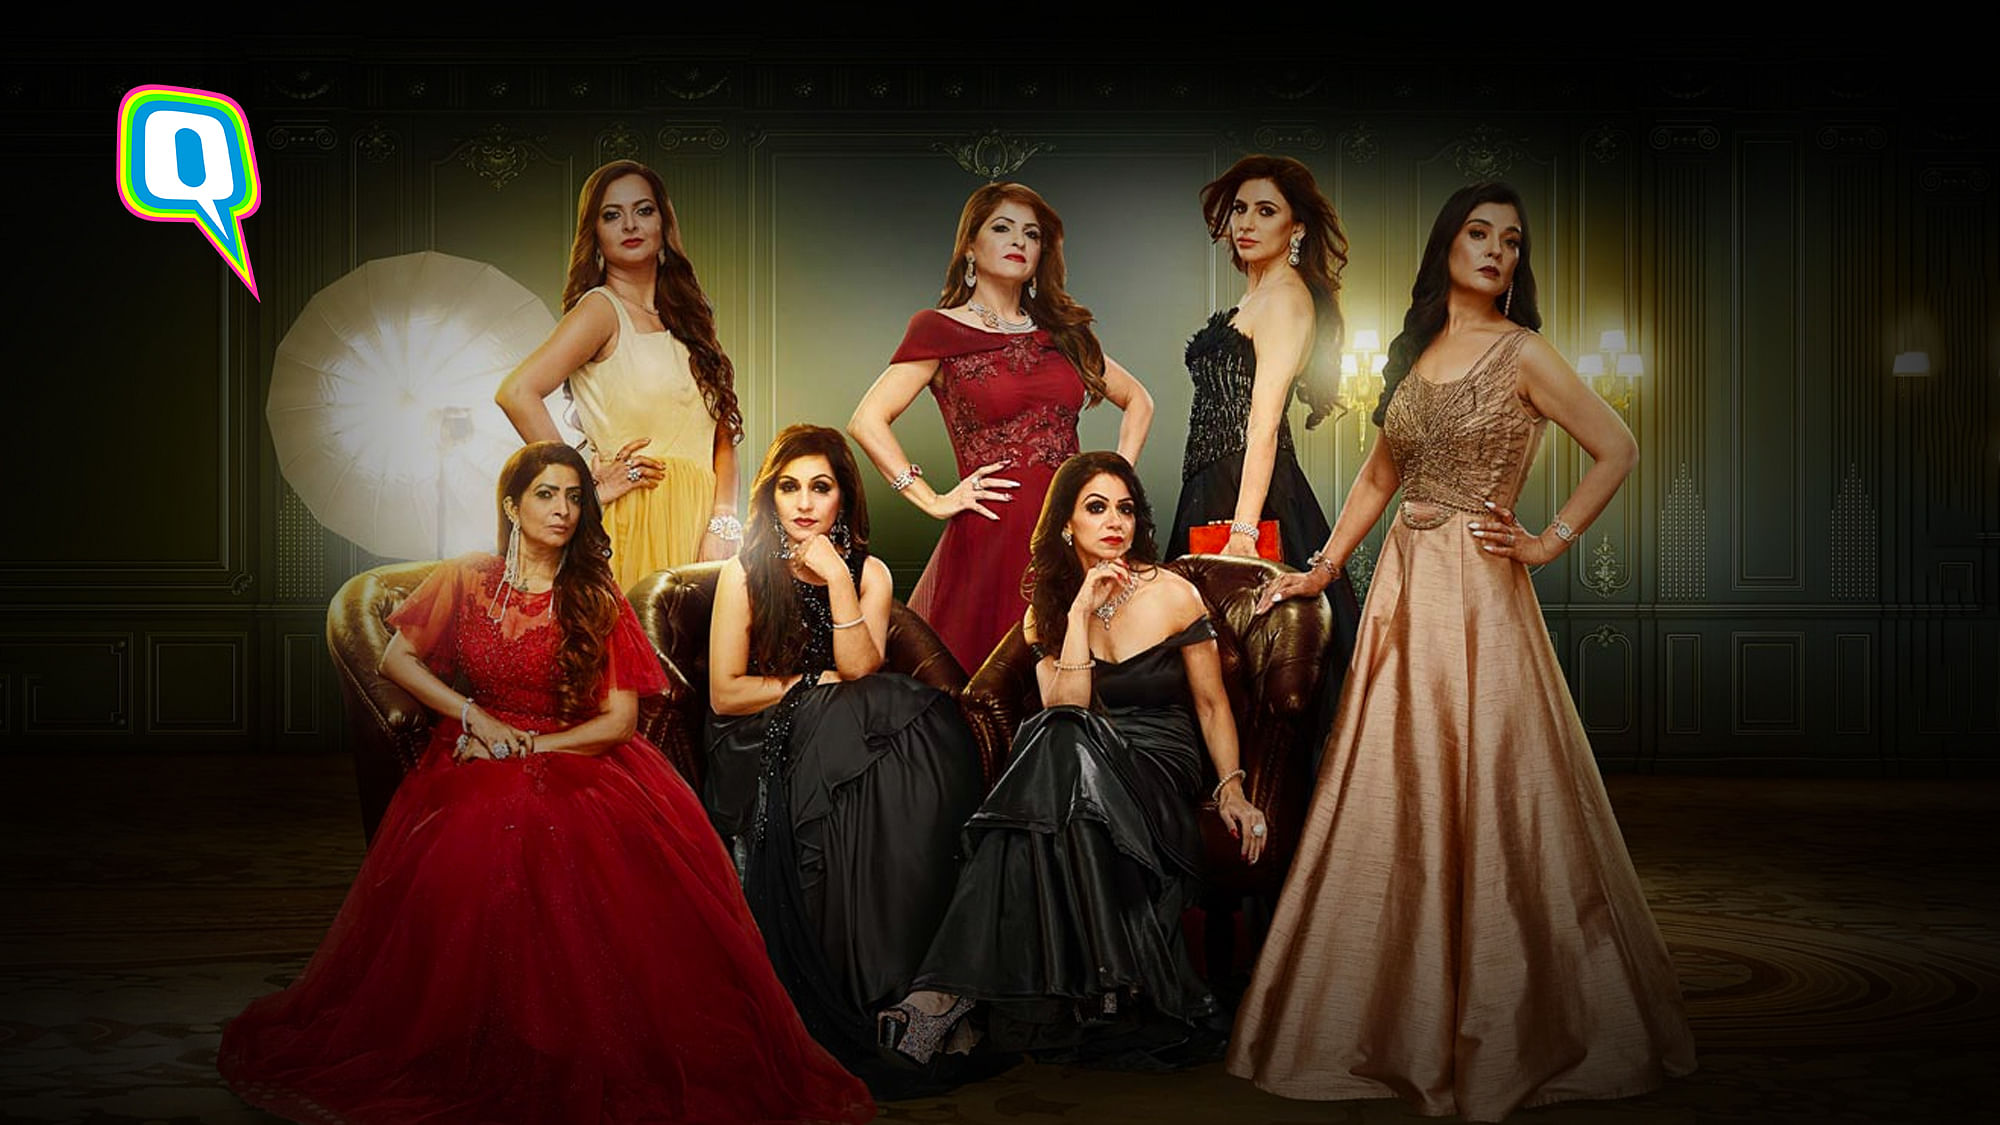 ‘Dilli Darlings’ is a show about rich Indian women and their lives.